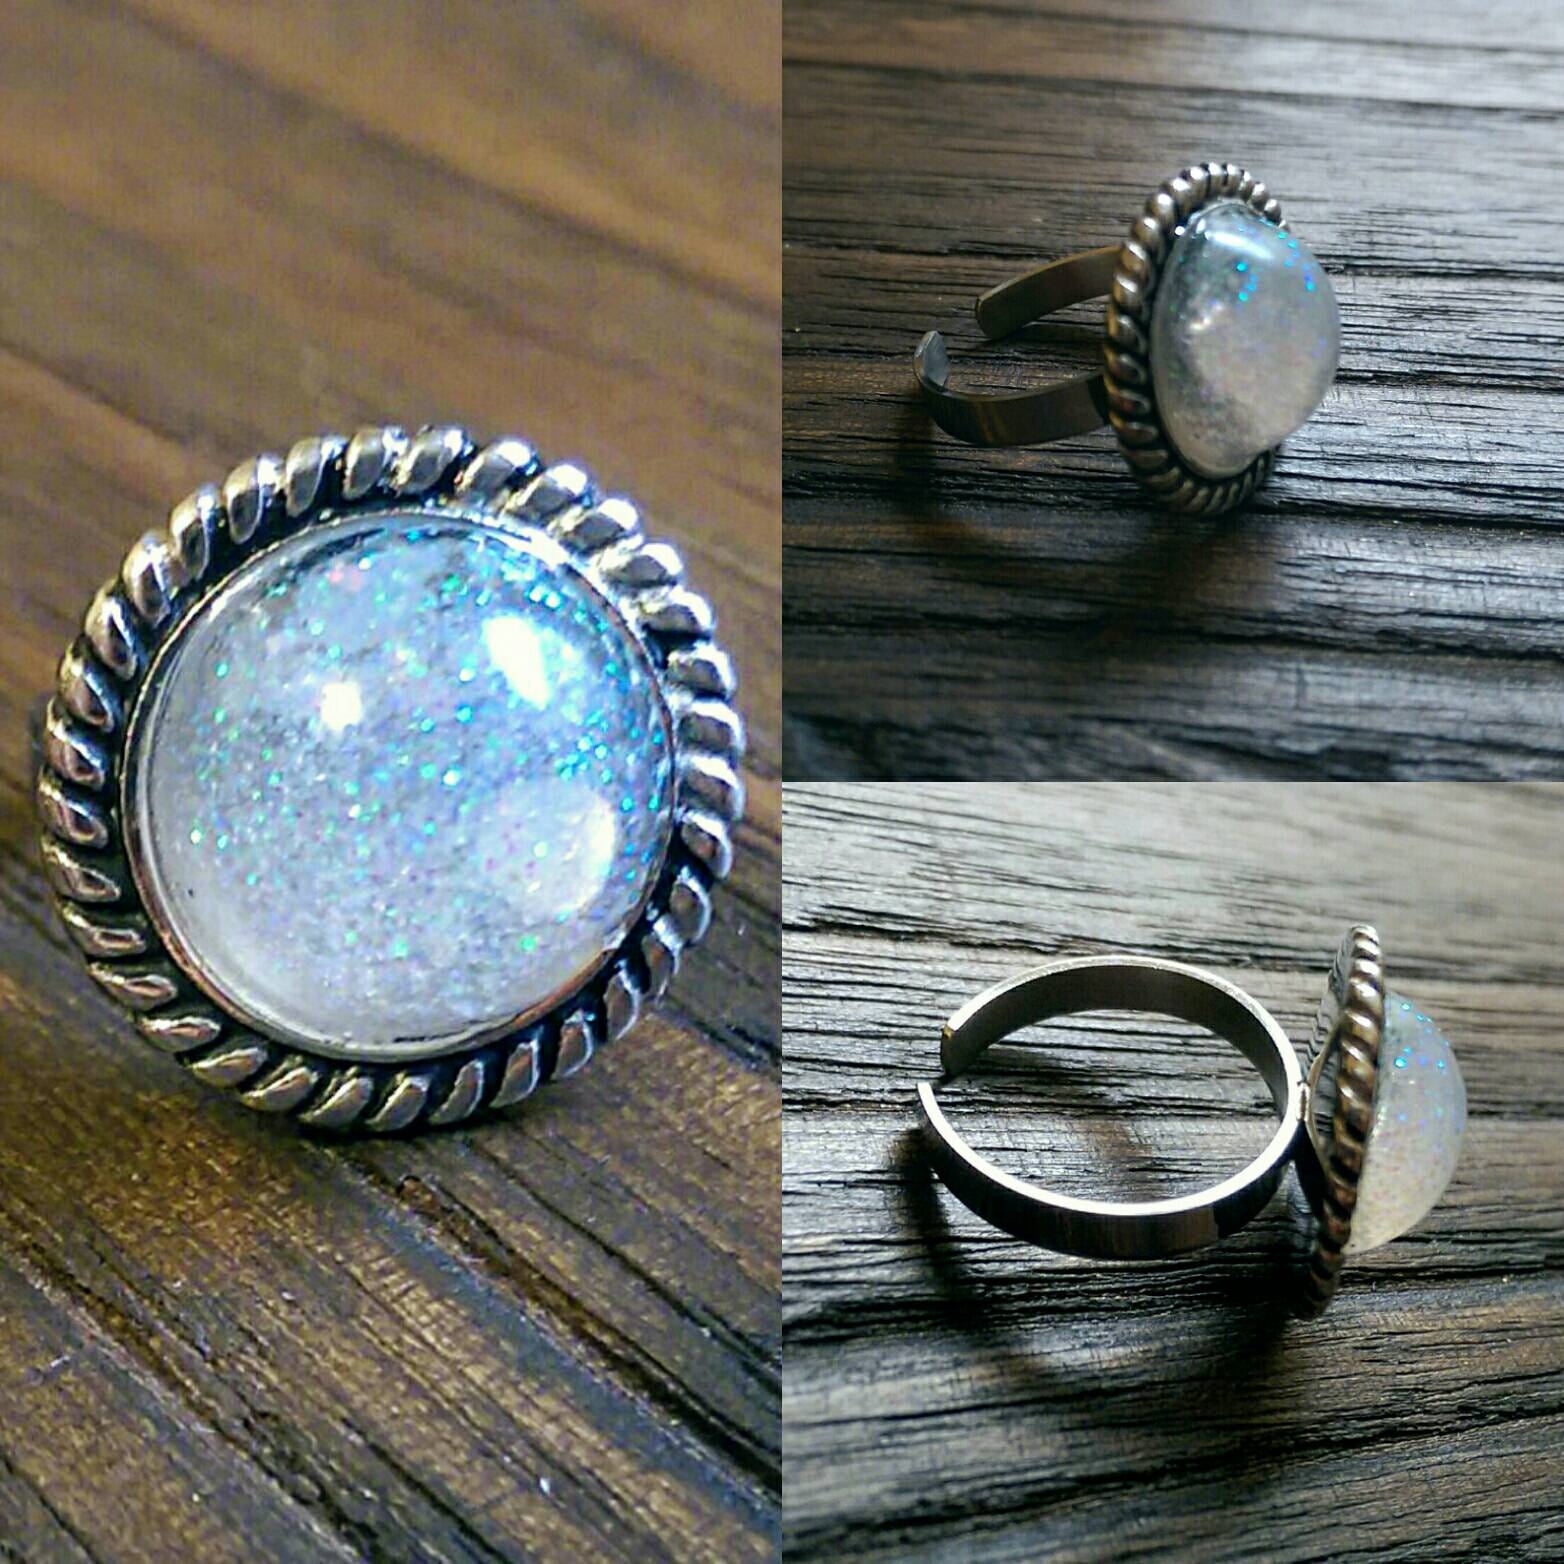 Resin Glitter Ring, Fine Glitter Stainless Steel Statement Ring - Silver and Resin Designs